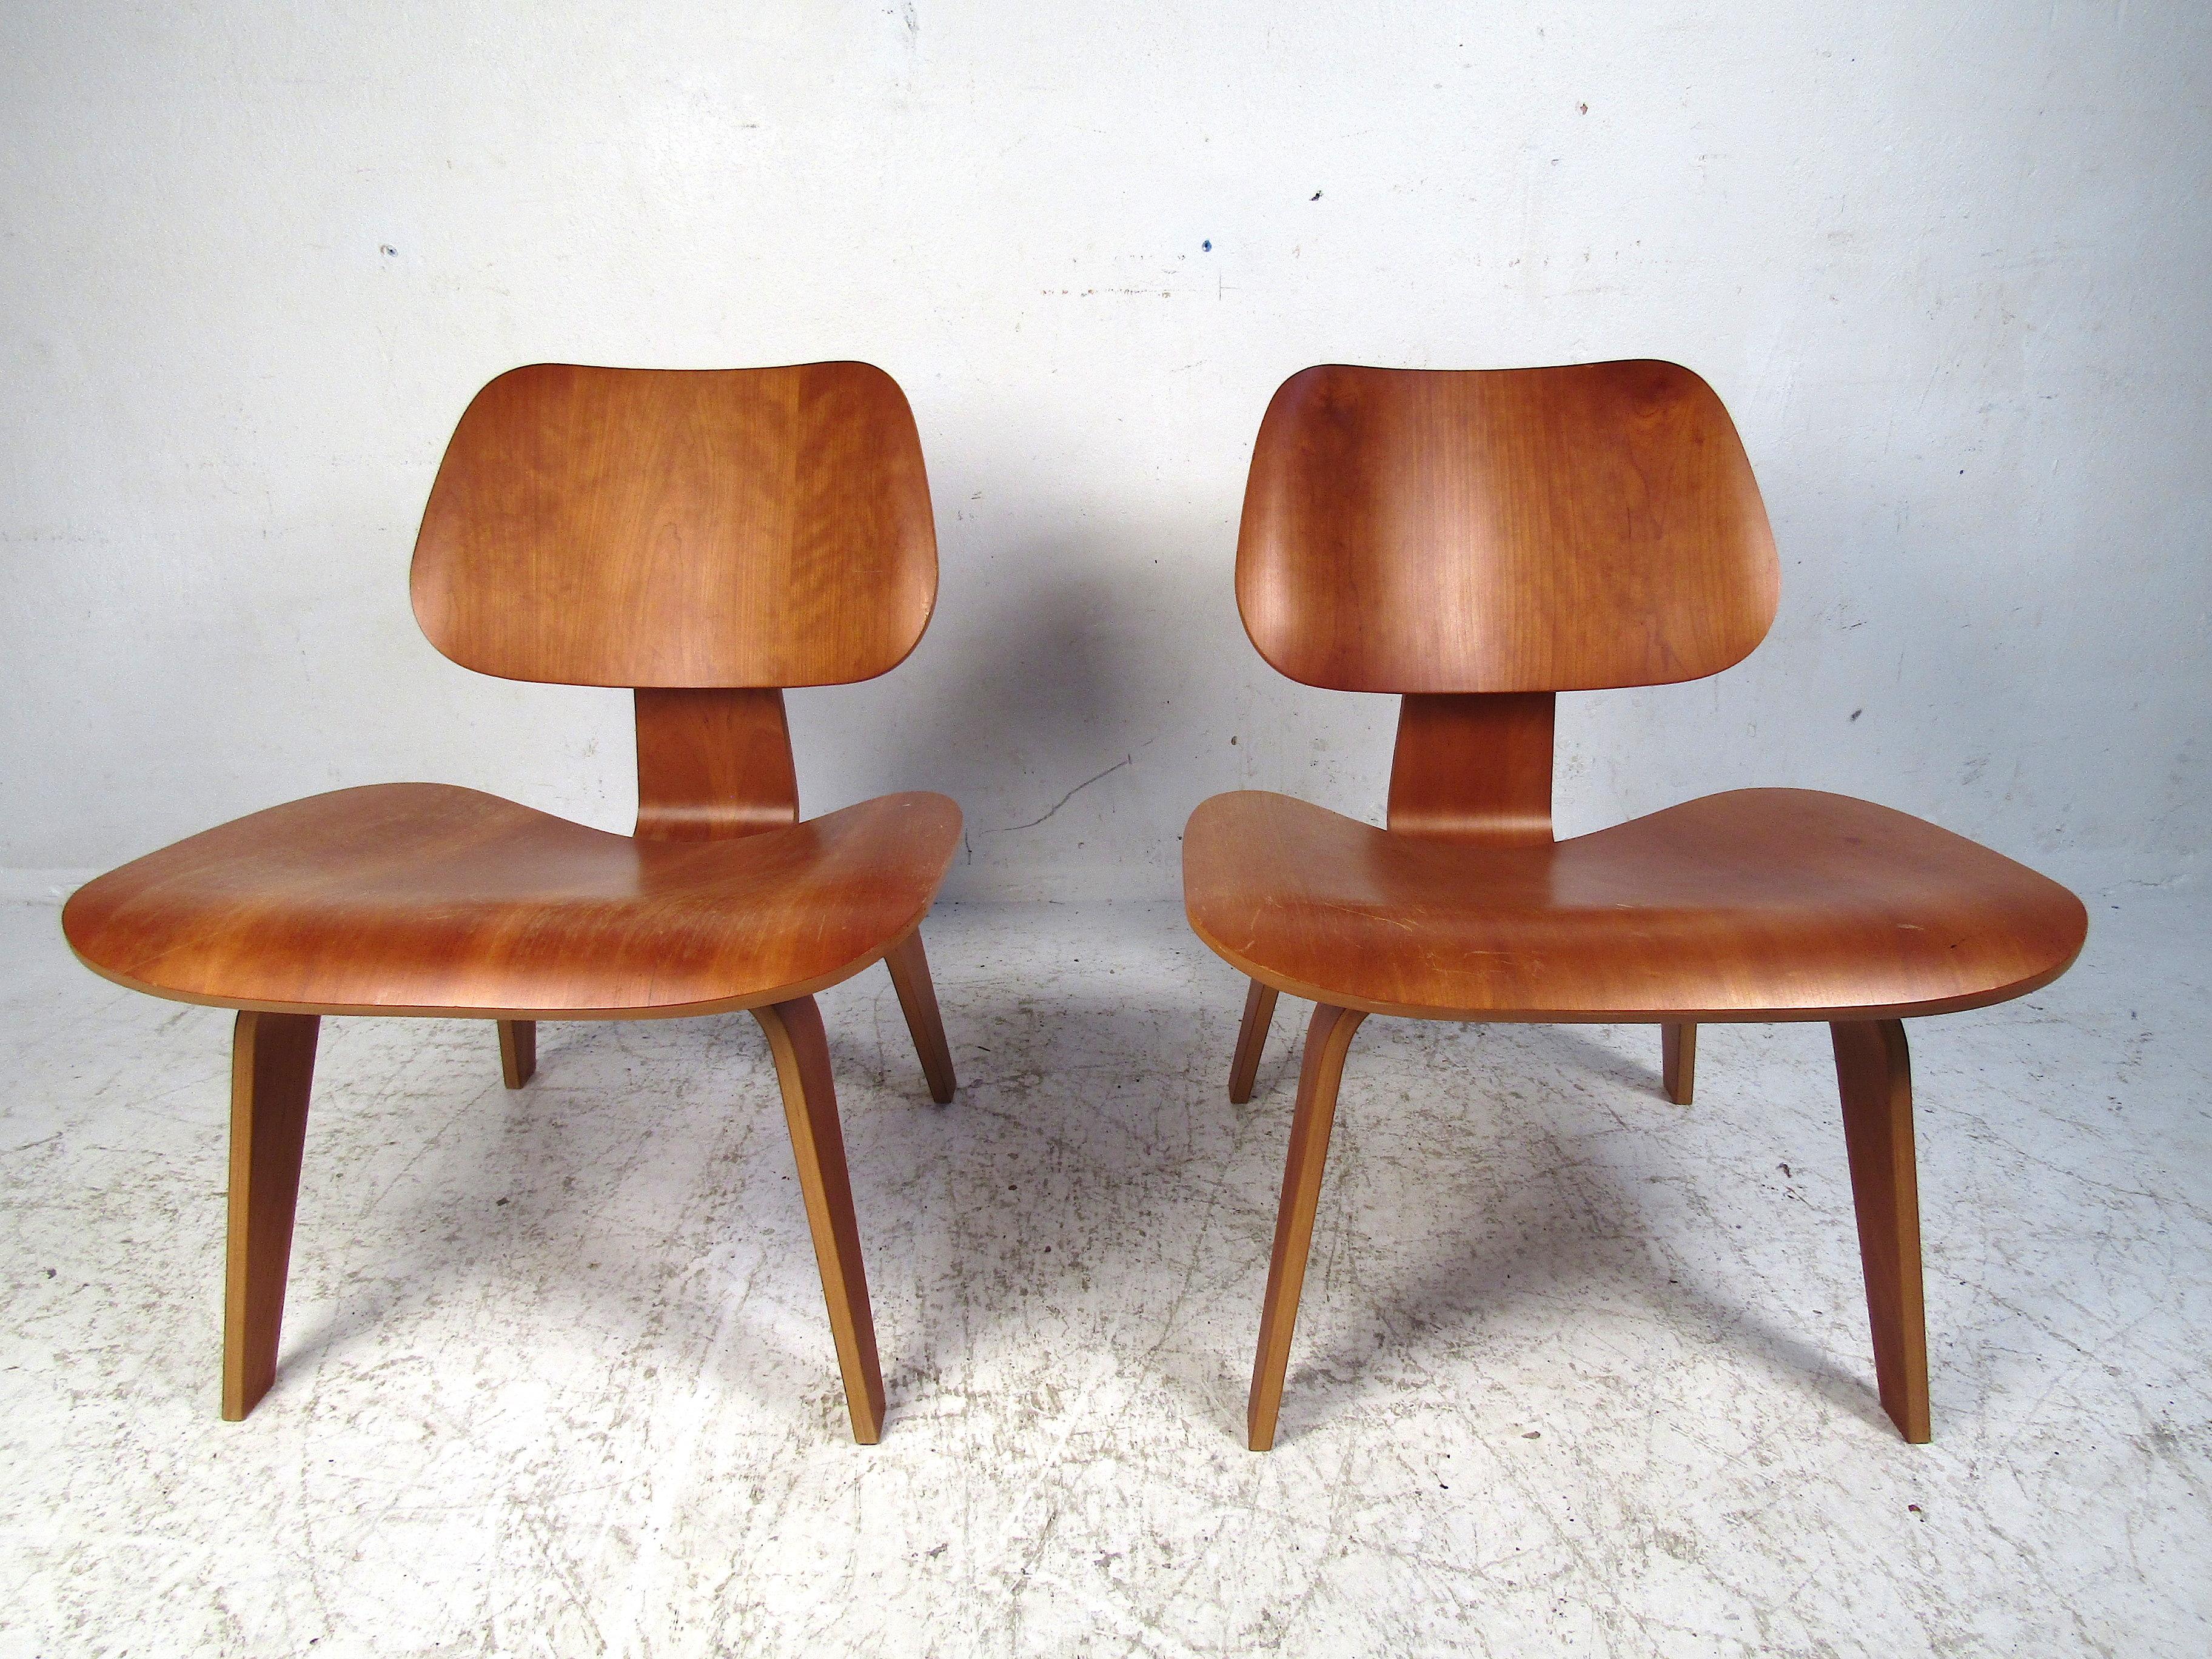 Nice pair of bentwood chairs. An Eames design. Please confirm item location with dealer (NJ or NY).